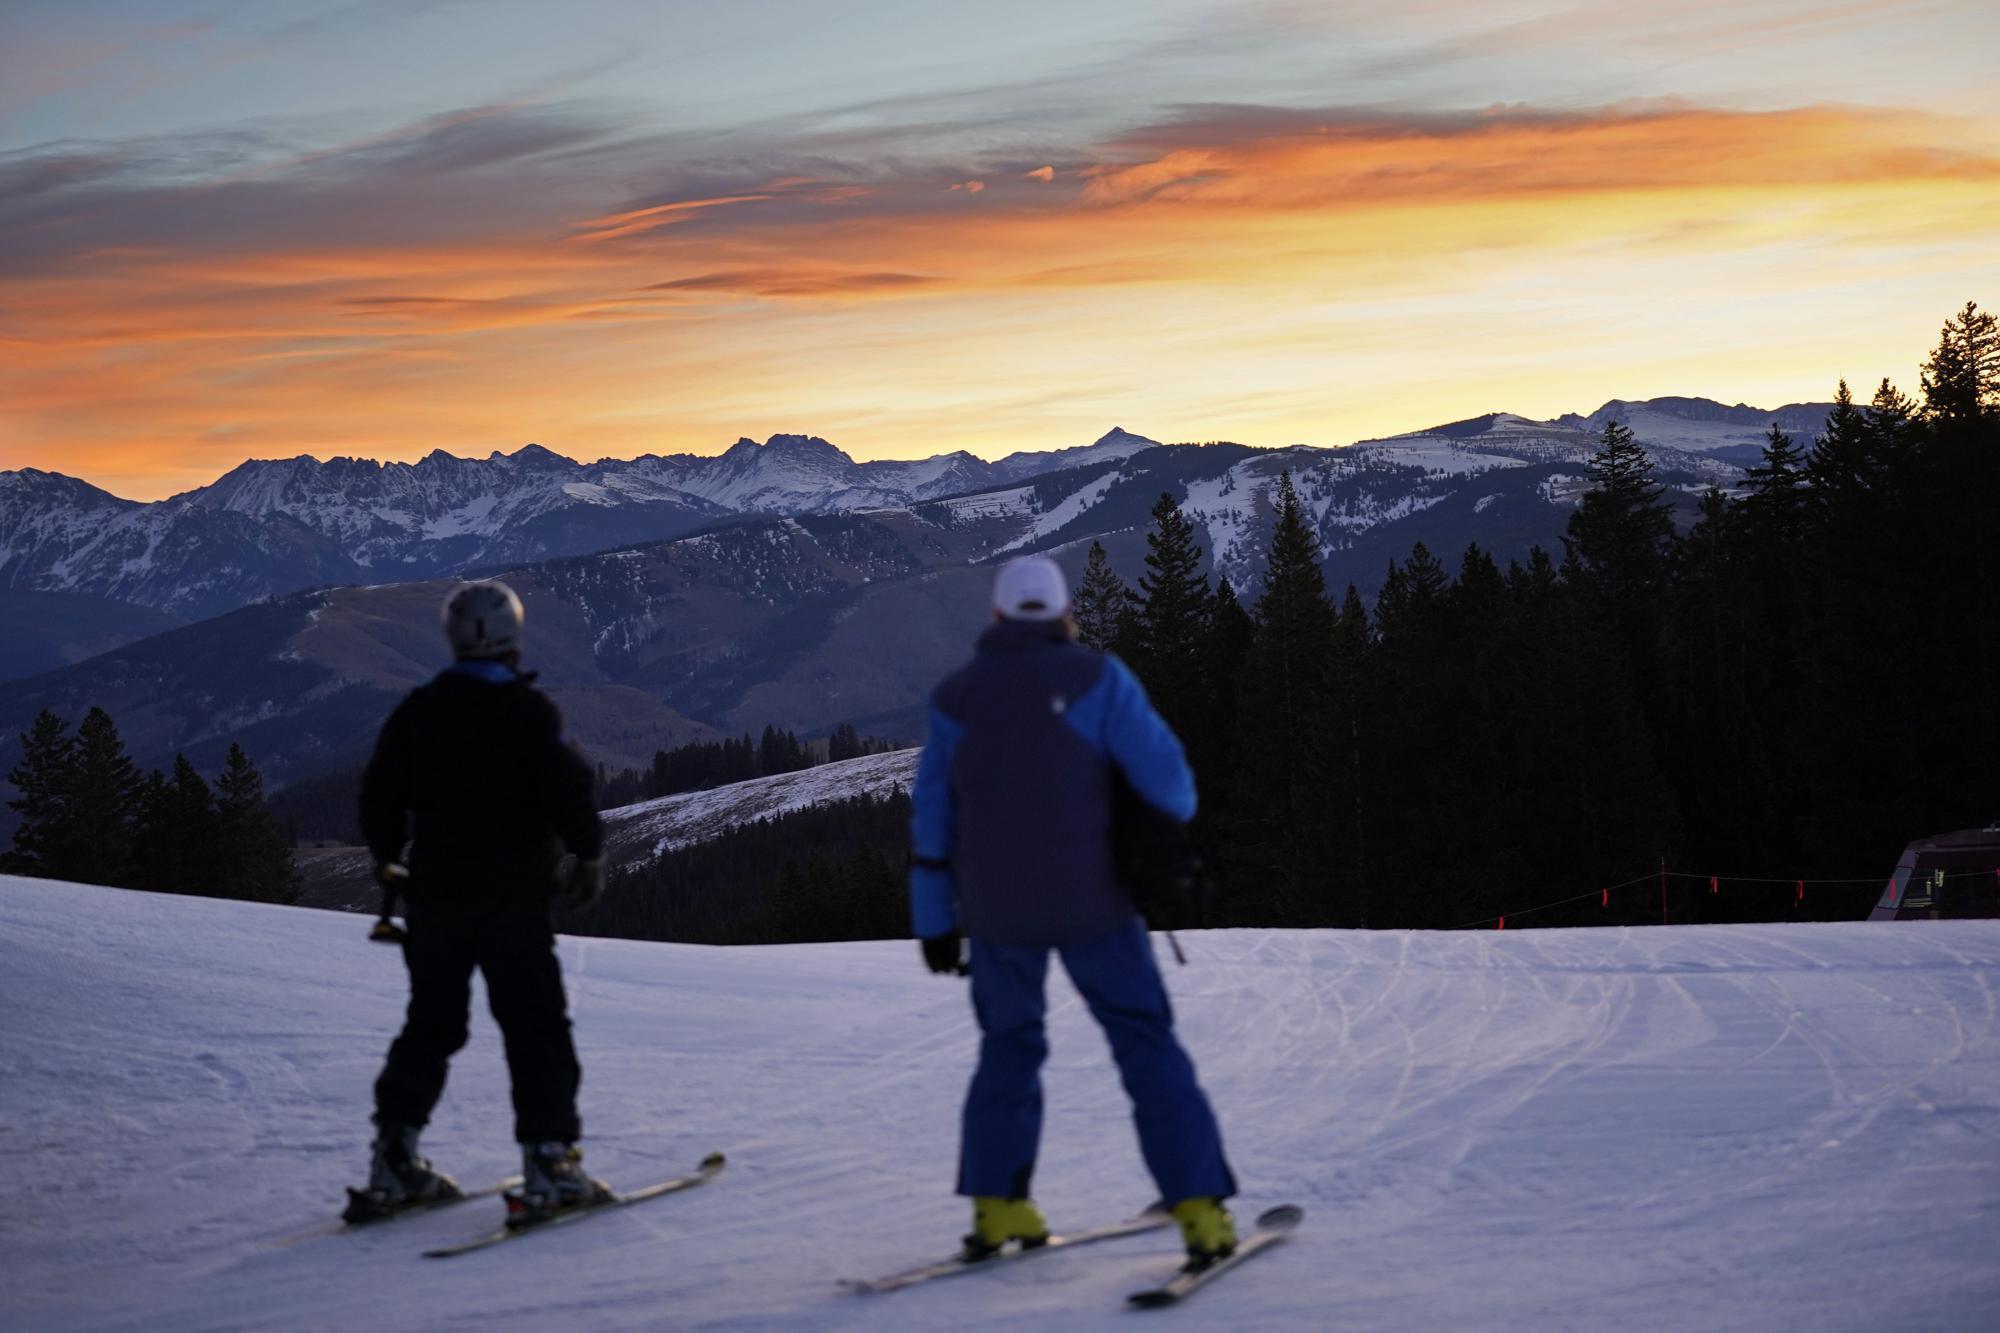 Skiers look east to the high peaks of the Rocky Mountains while skiing on man-made snow, Dec. 4, 2021, in Beaver Creek, Colo.